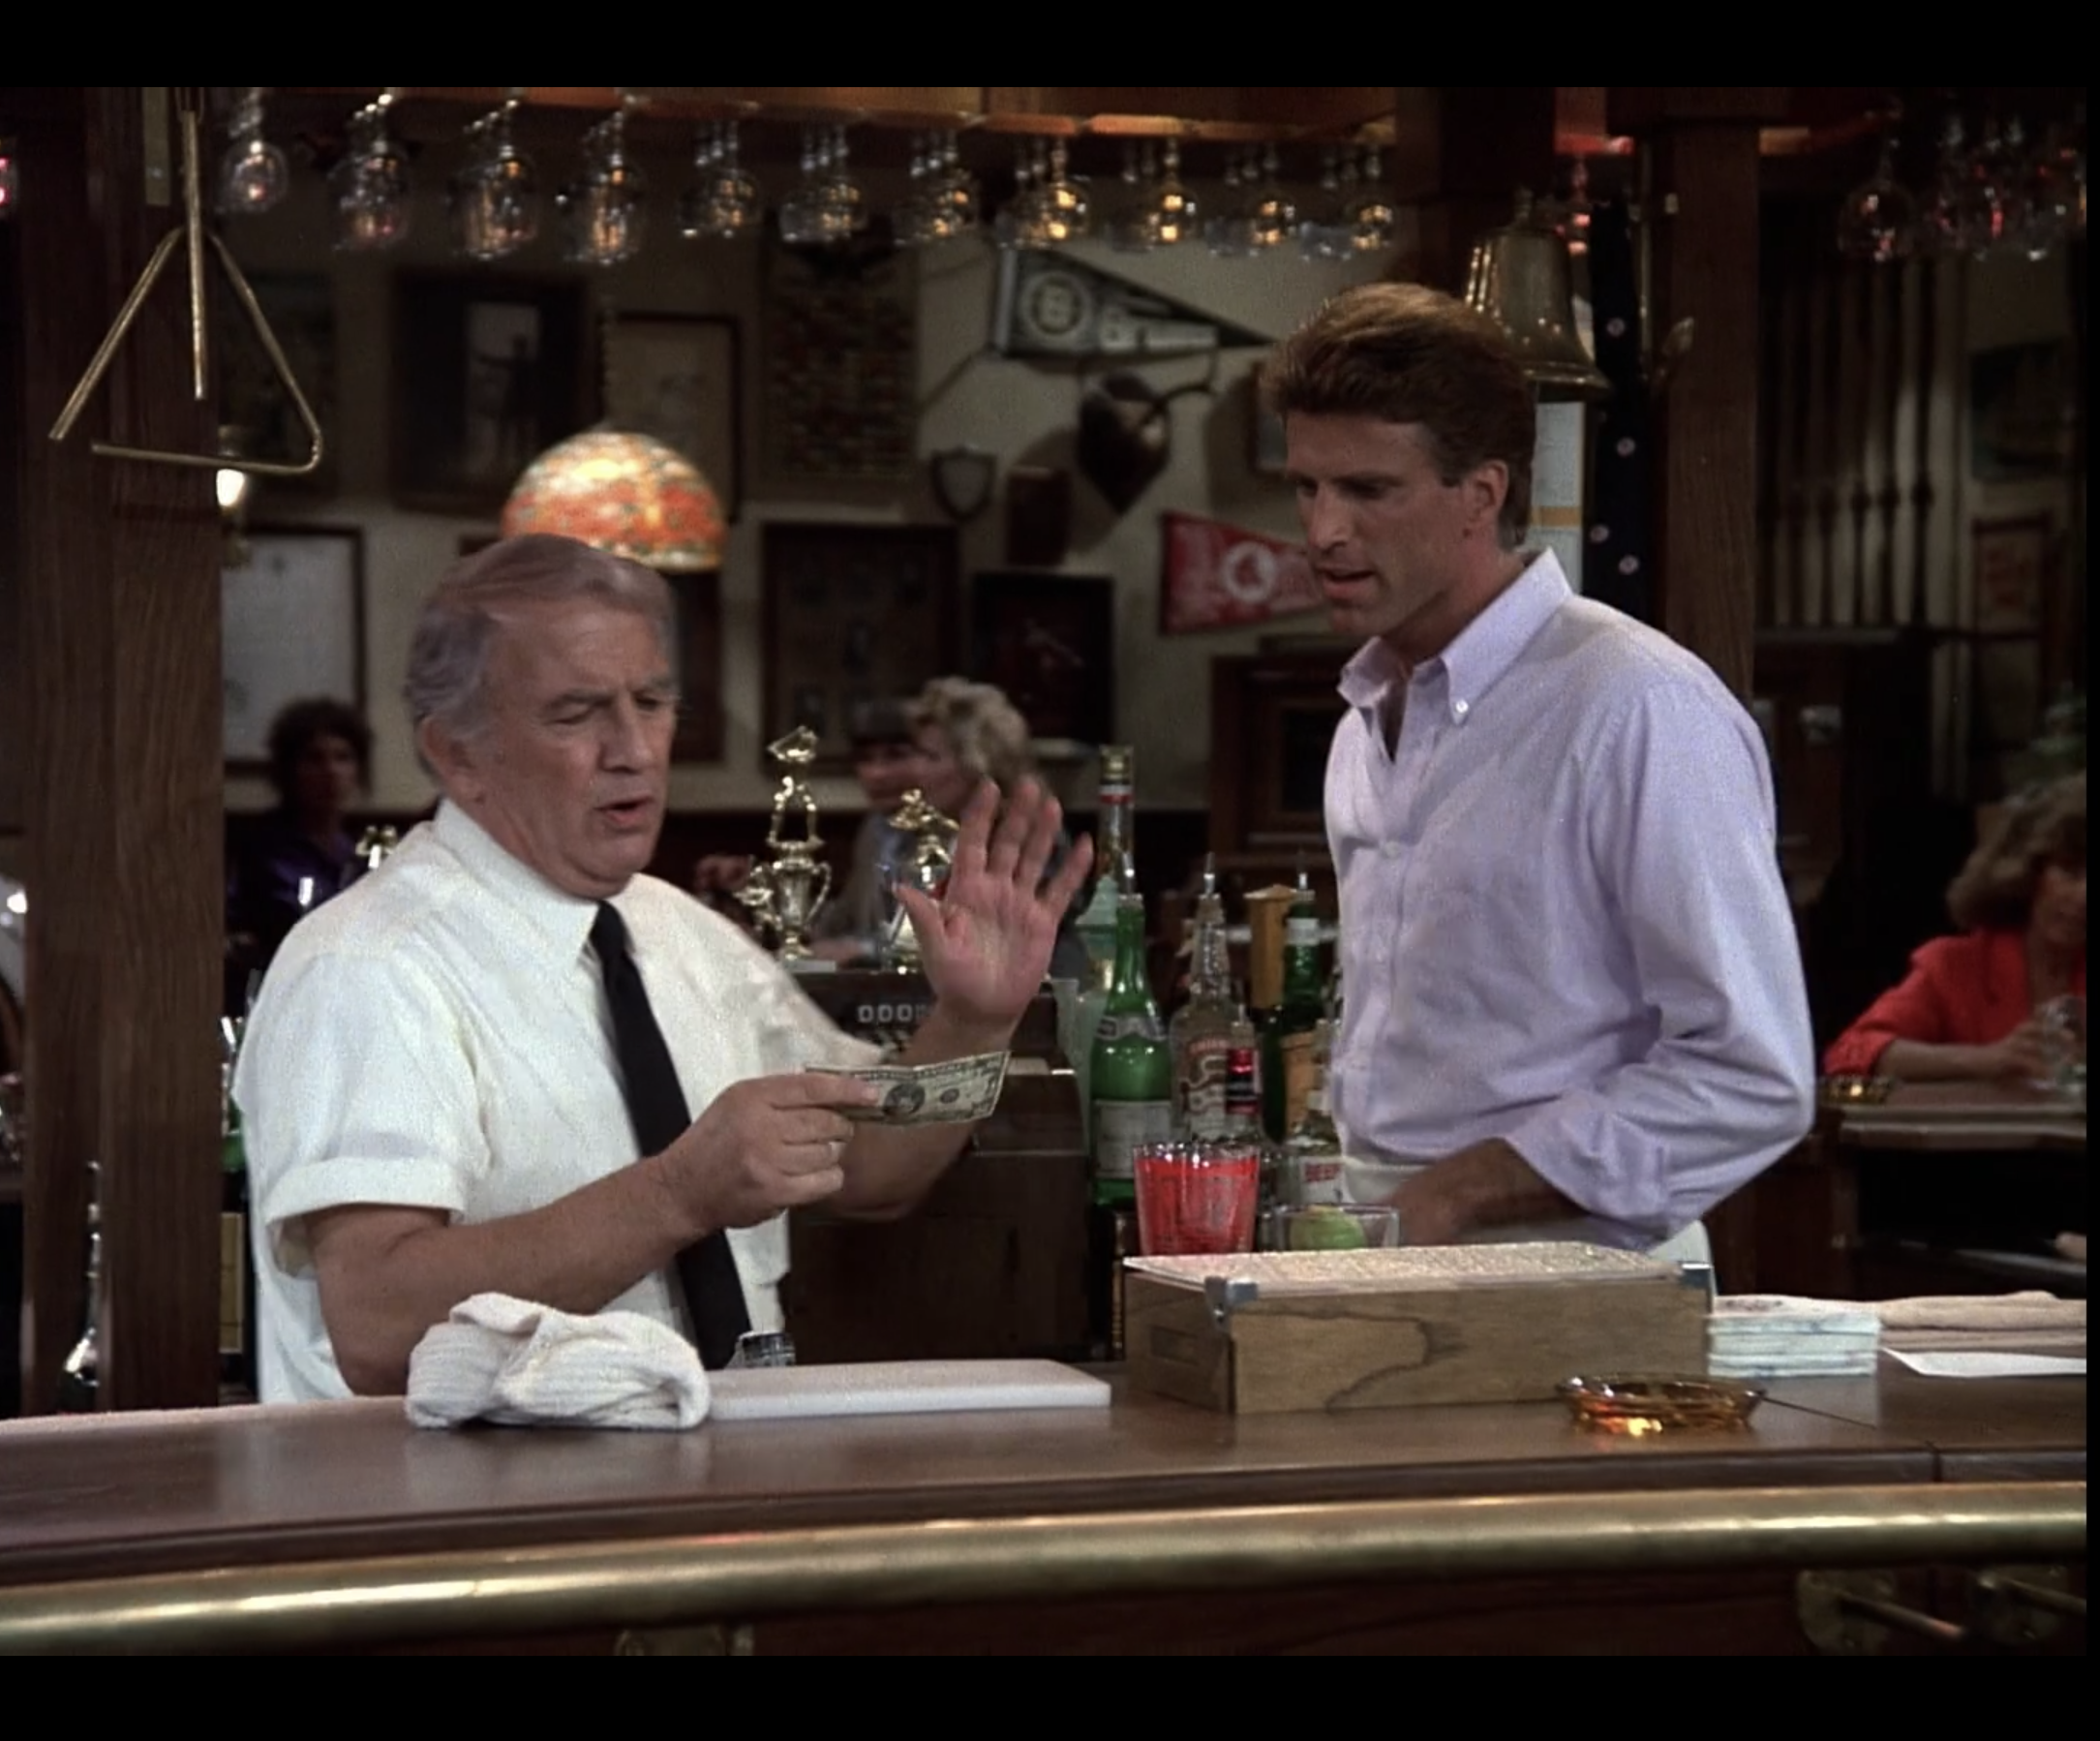 Ted Danson stands behind the bar